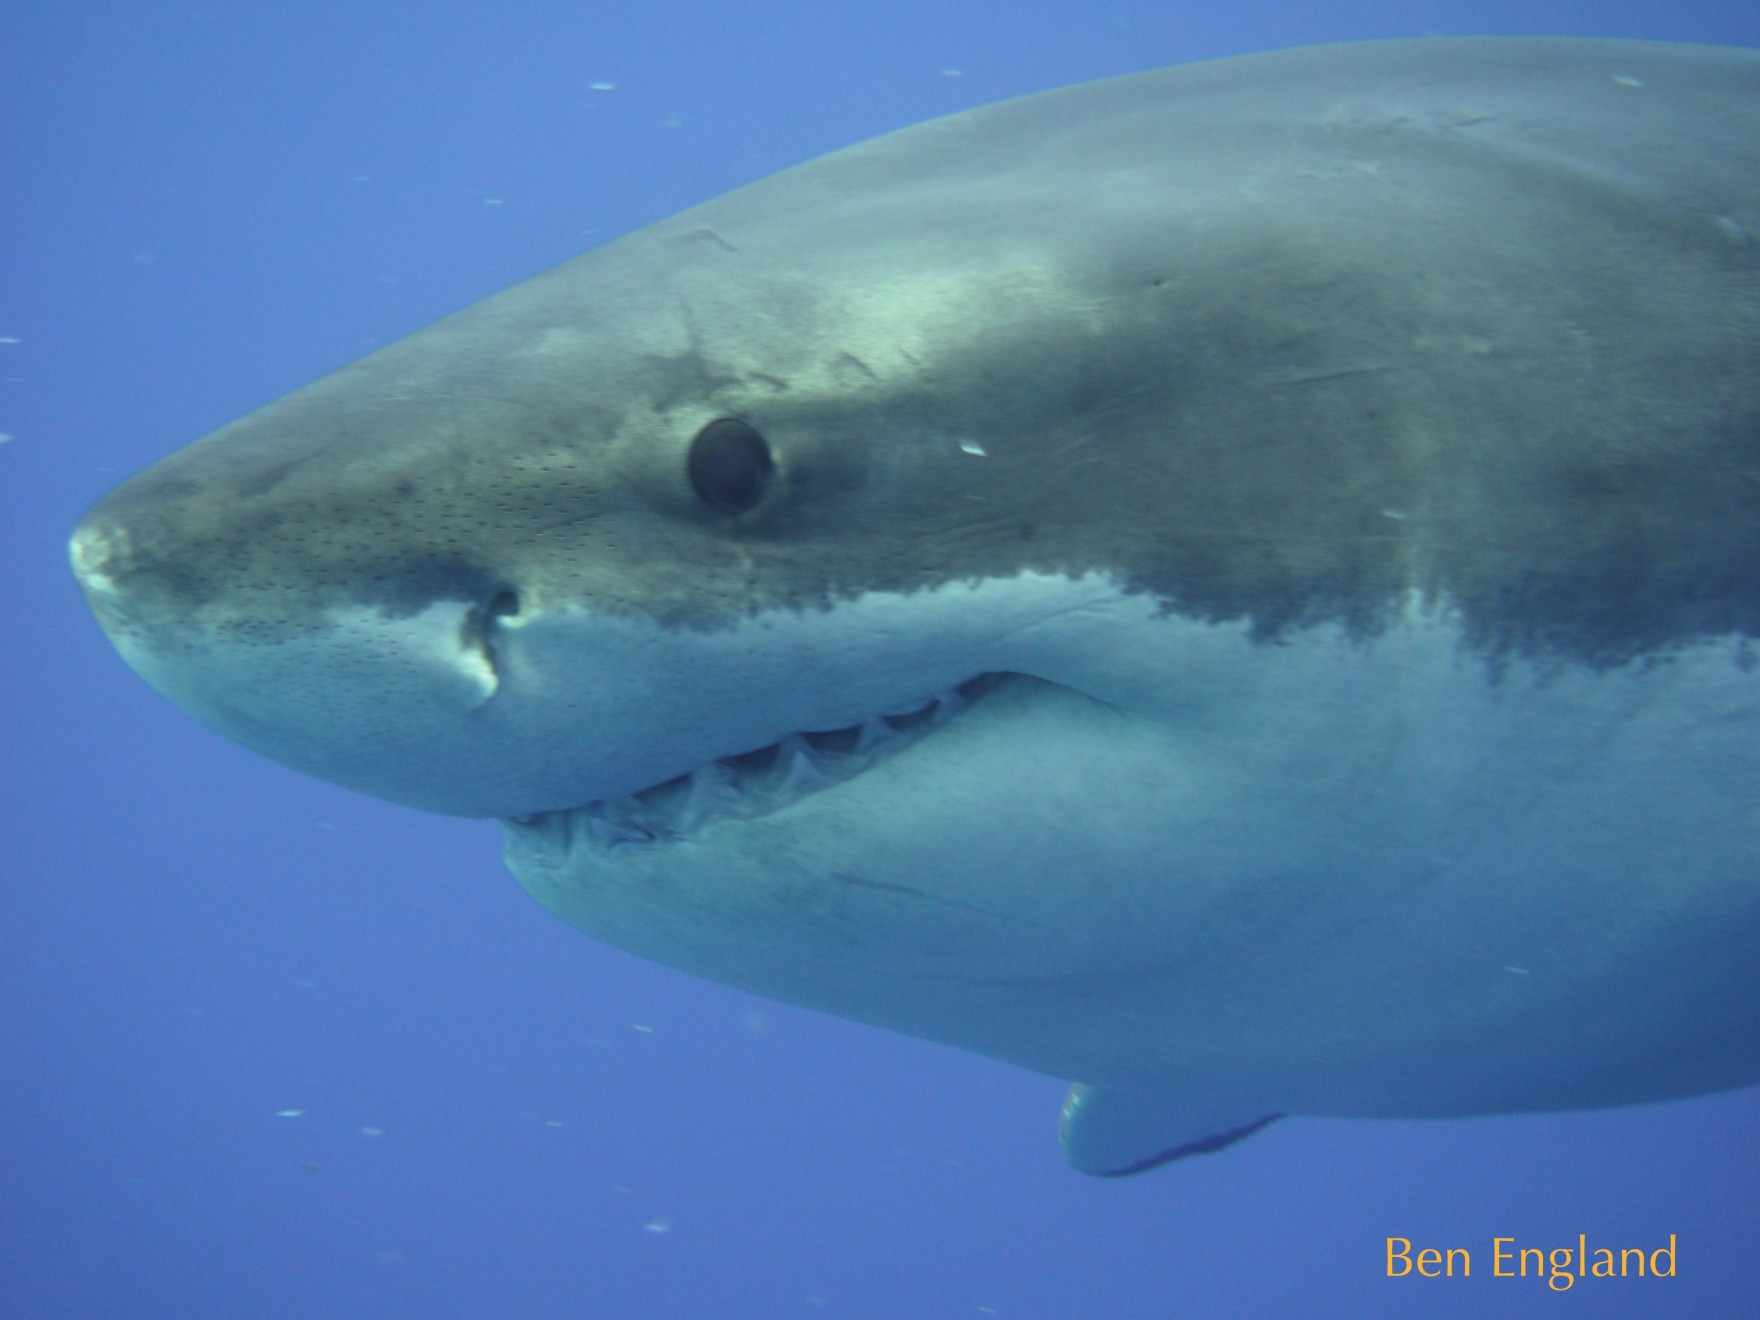 great white shark up close